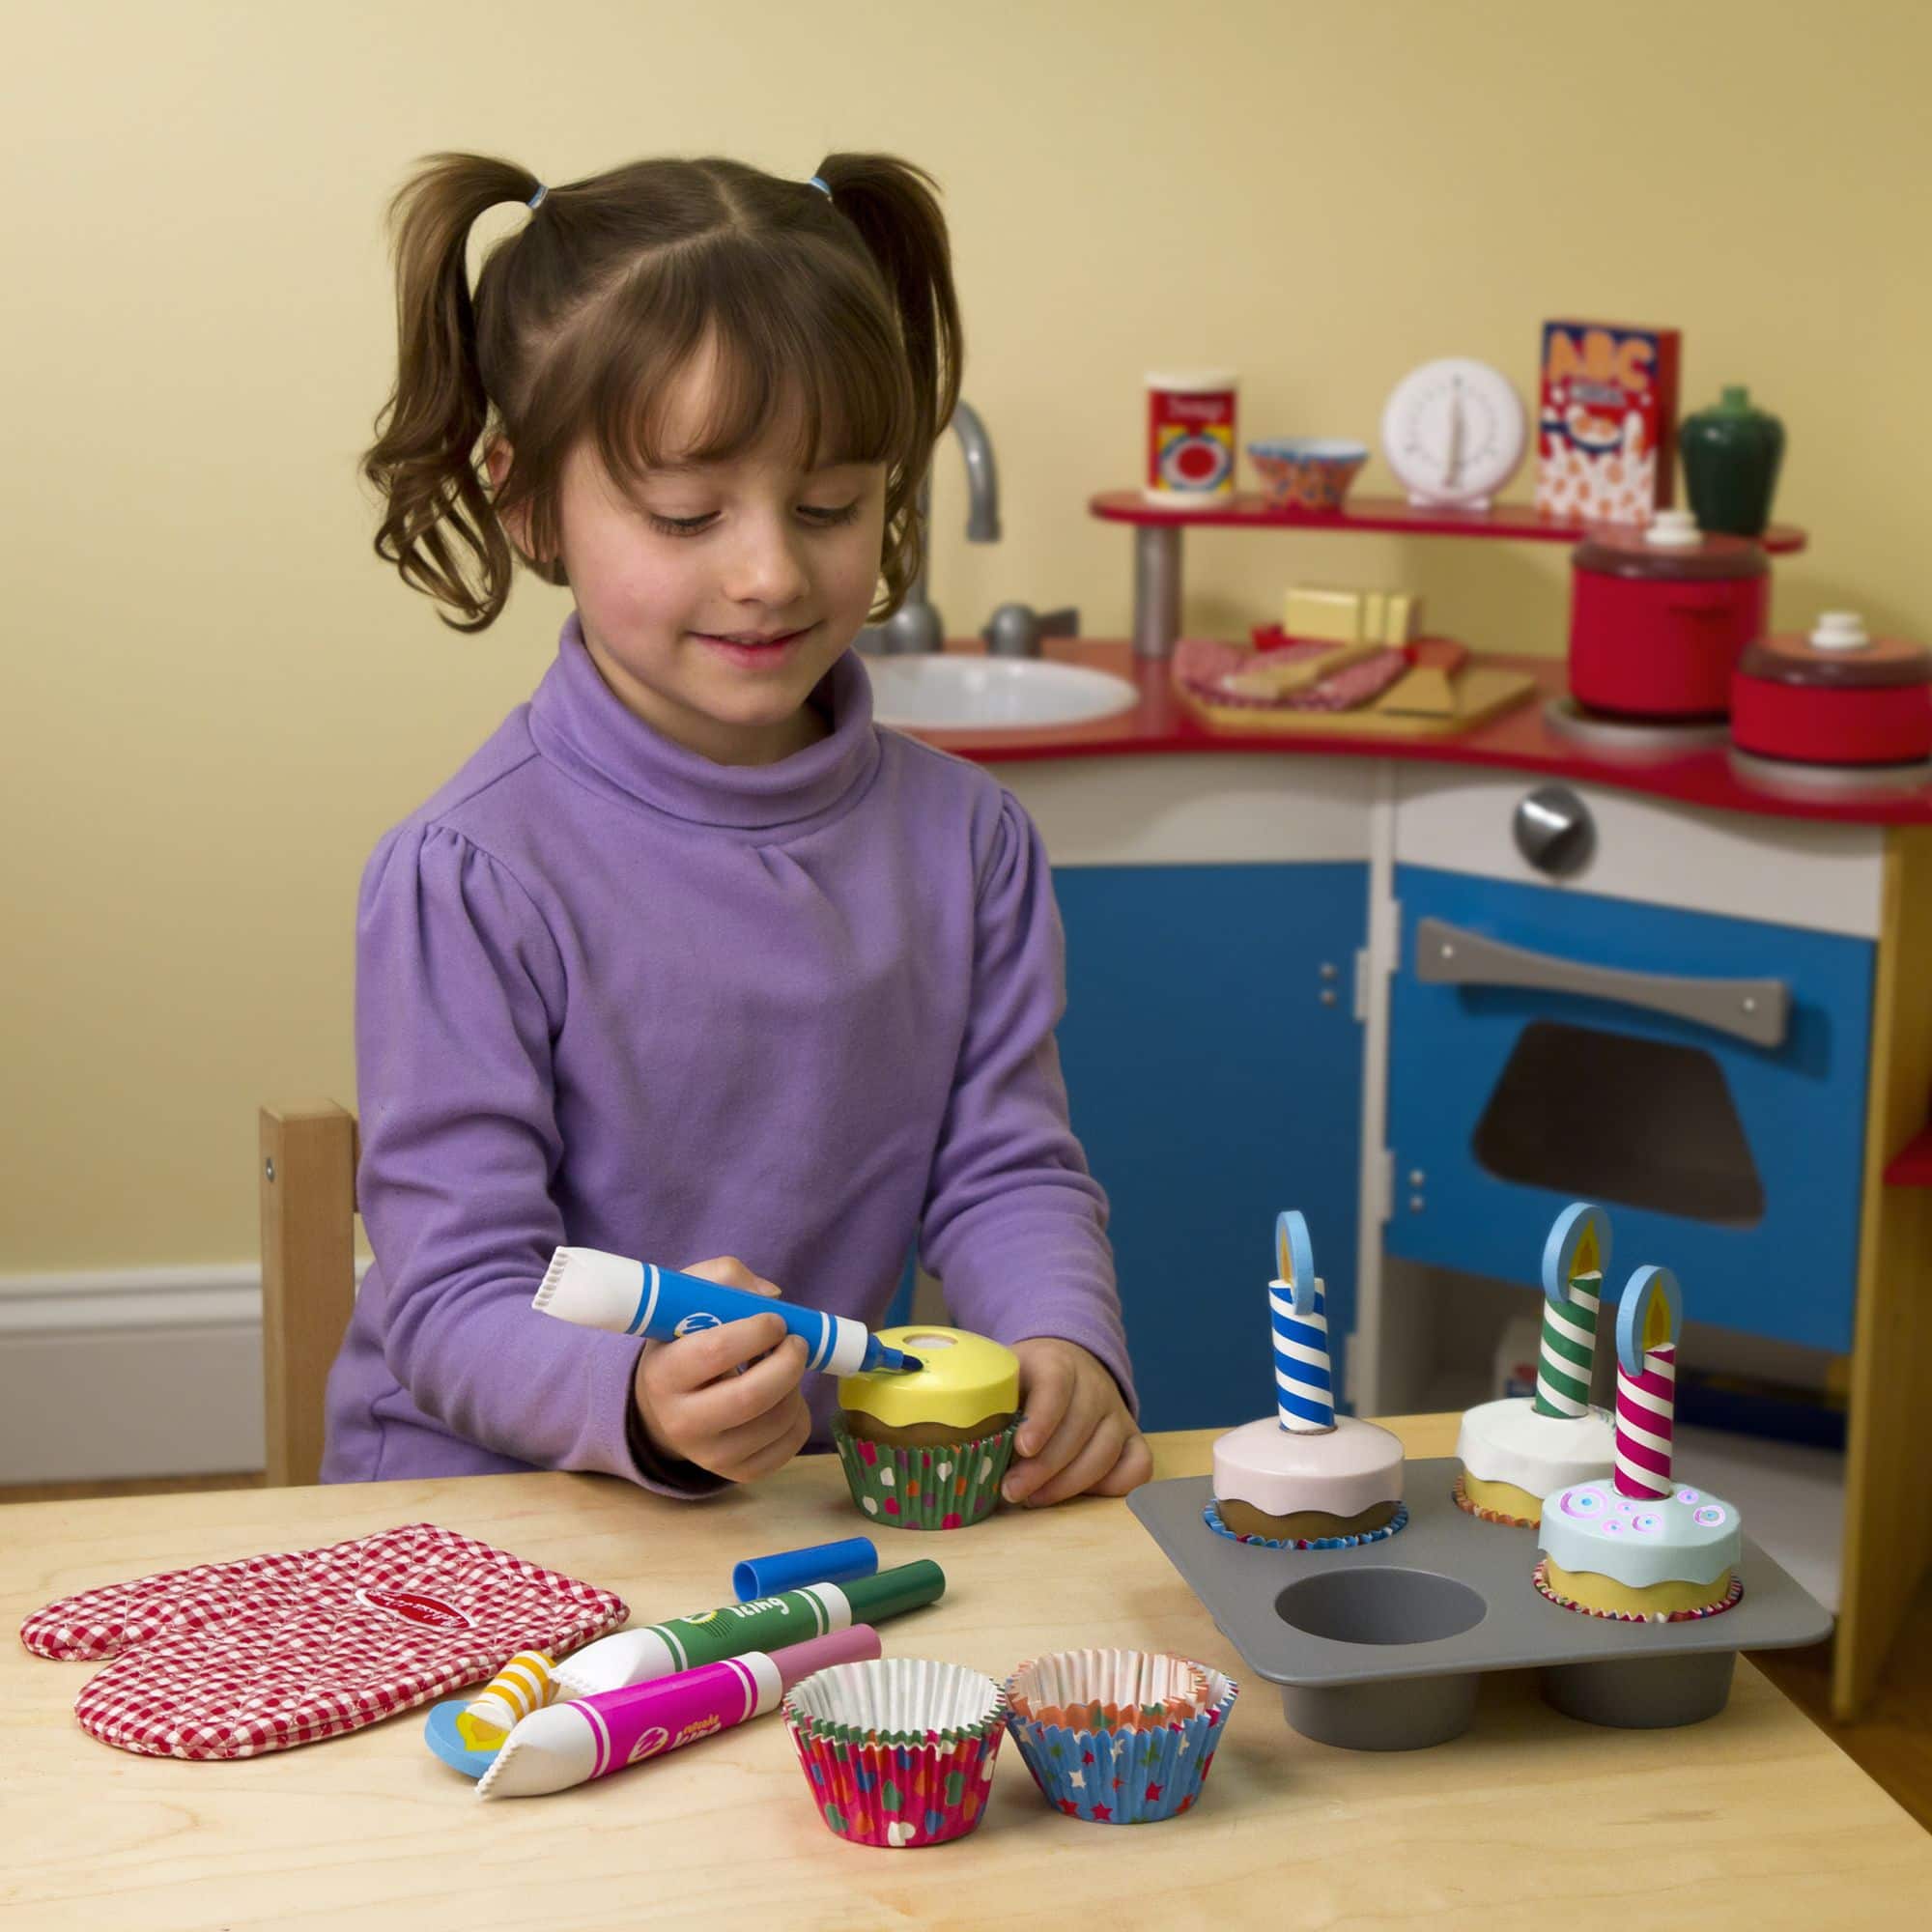 Bake and Decorate Cupcake Set Melissa & Doug 4019 for sale online 